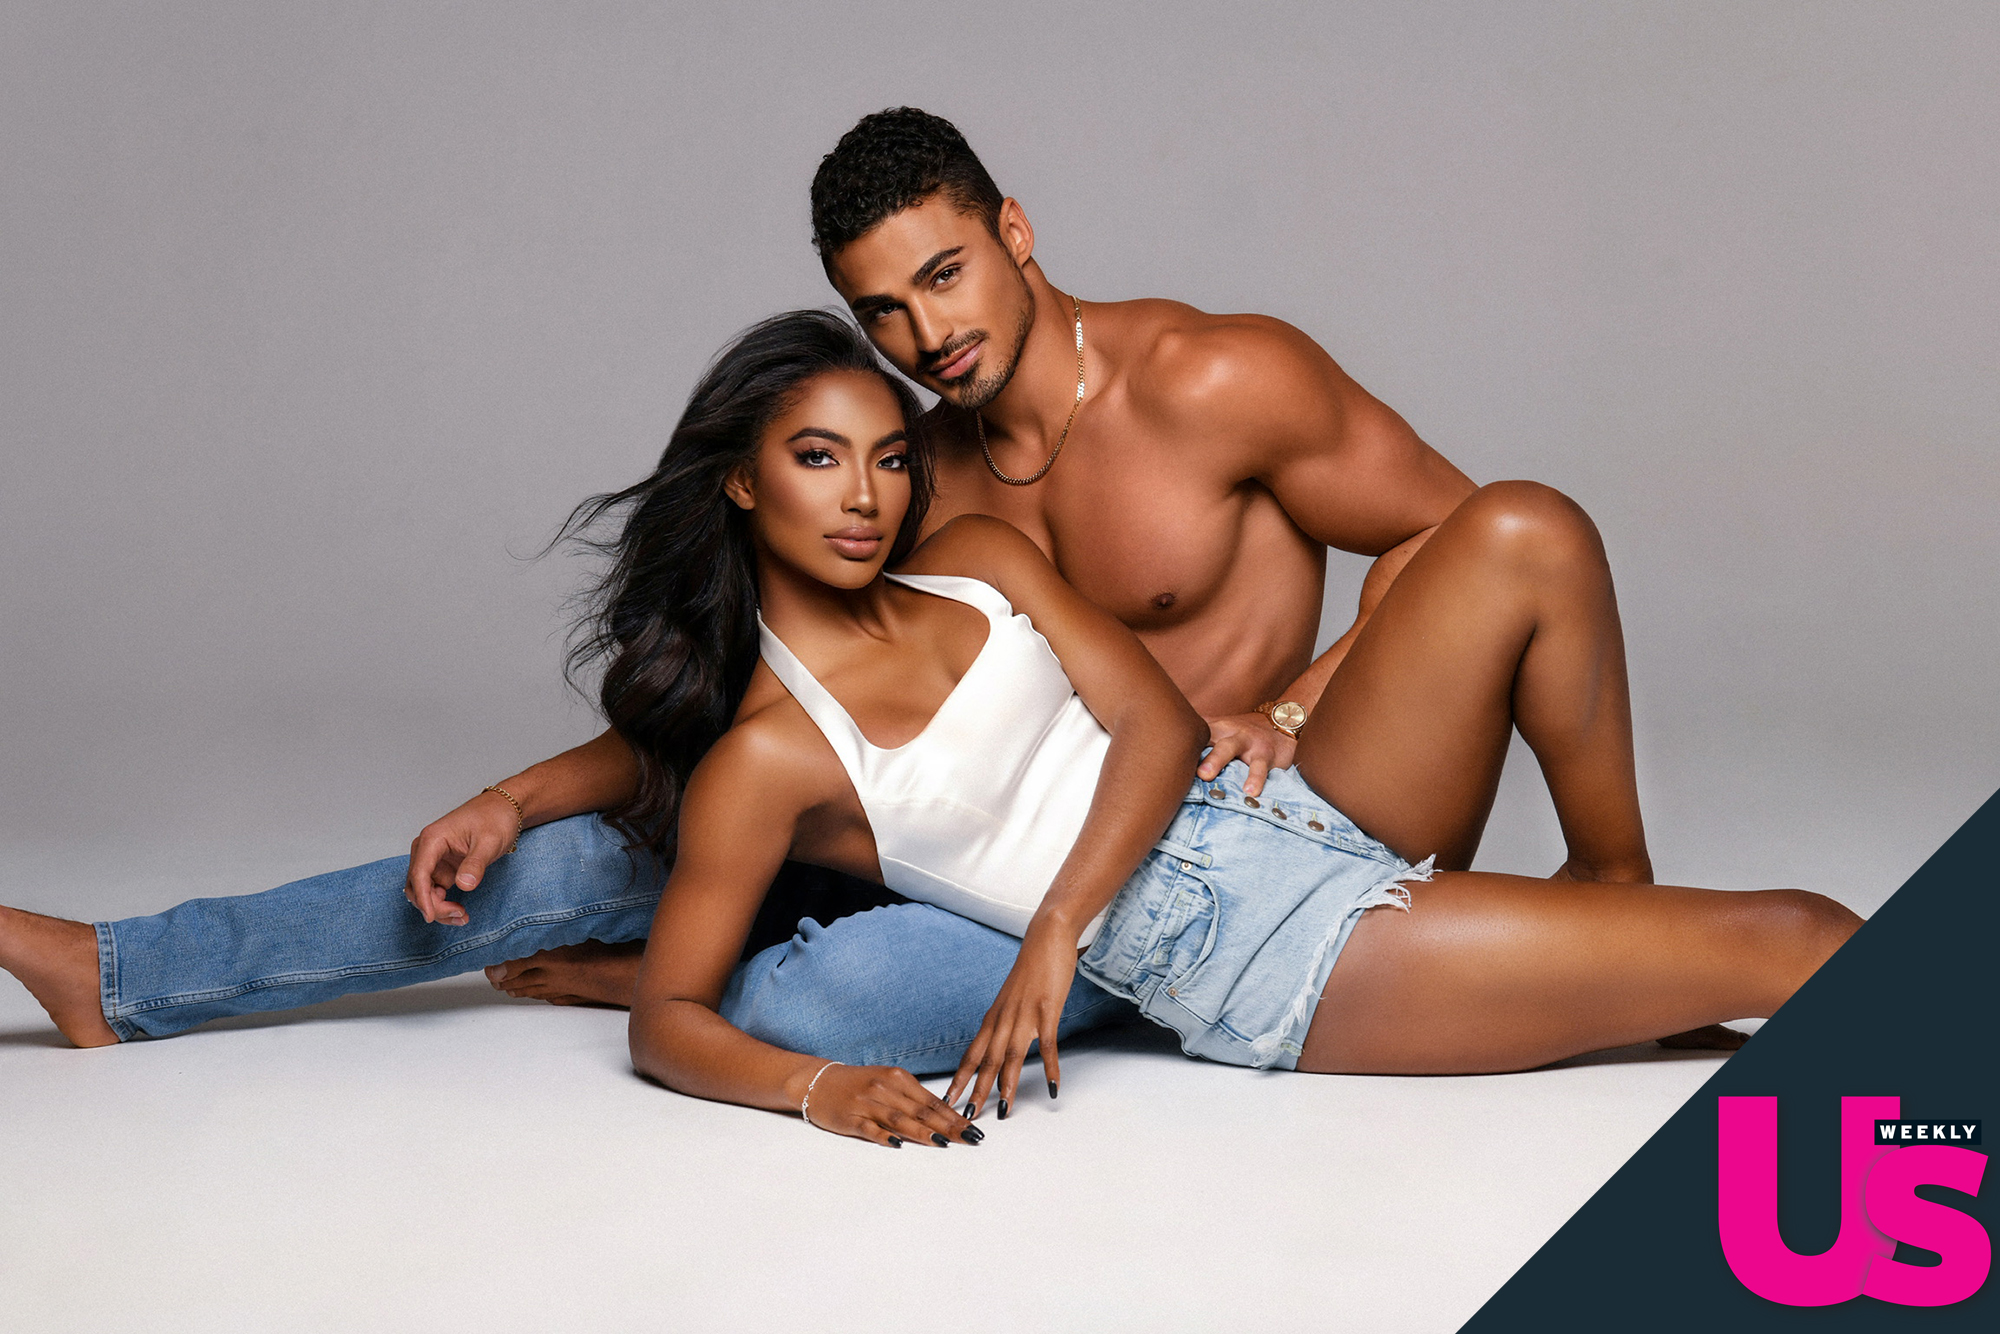 Big Brothers Taylor and Joseph Pose for Sexy Anniversary Photos pic picture